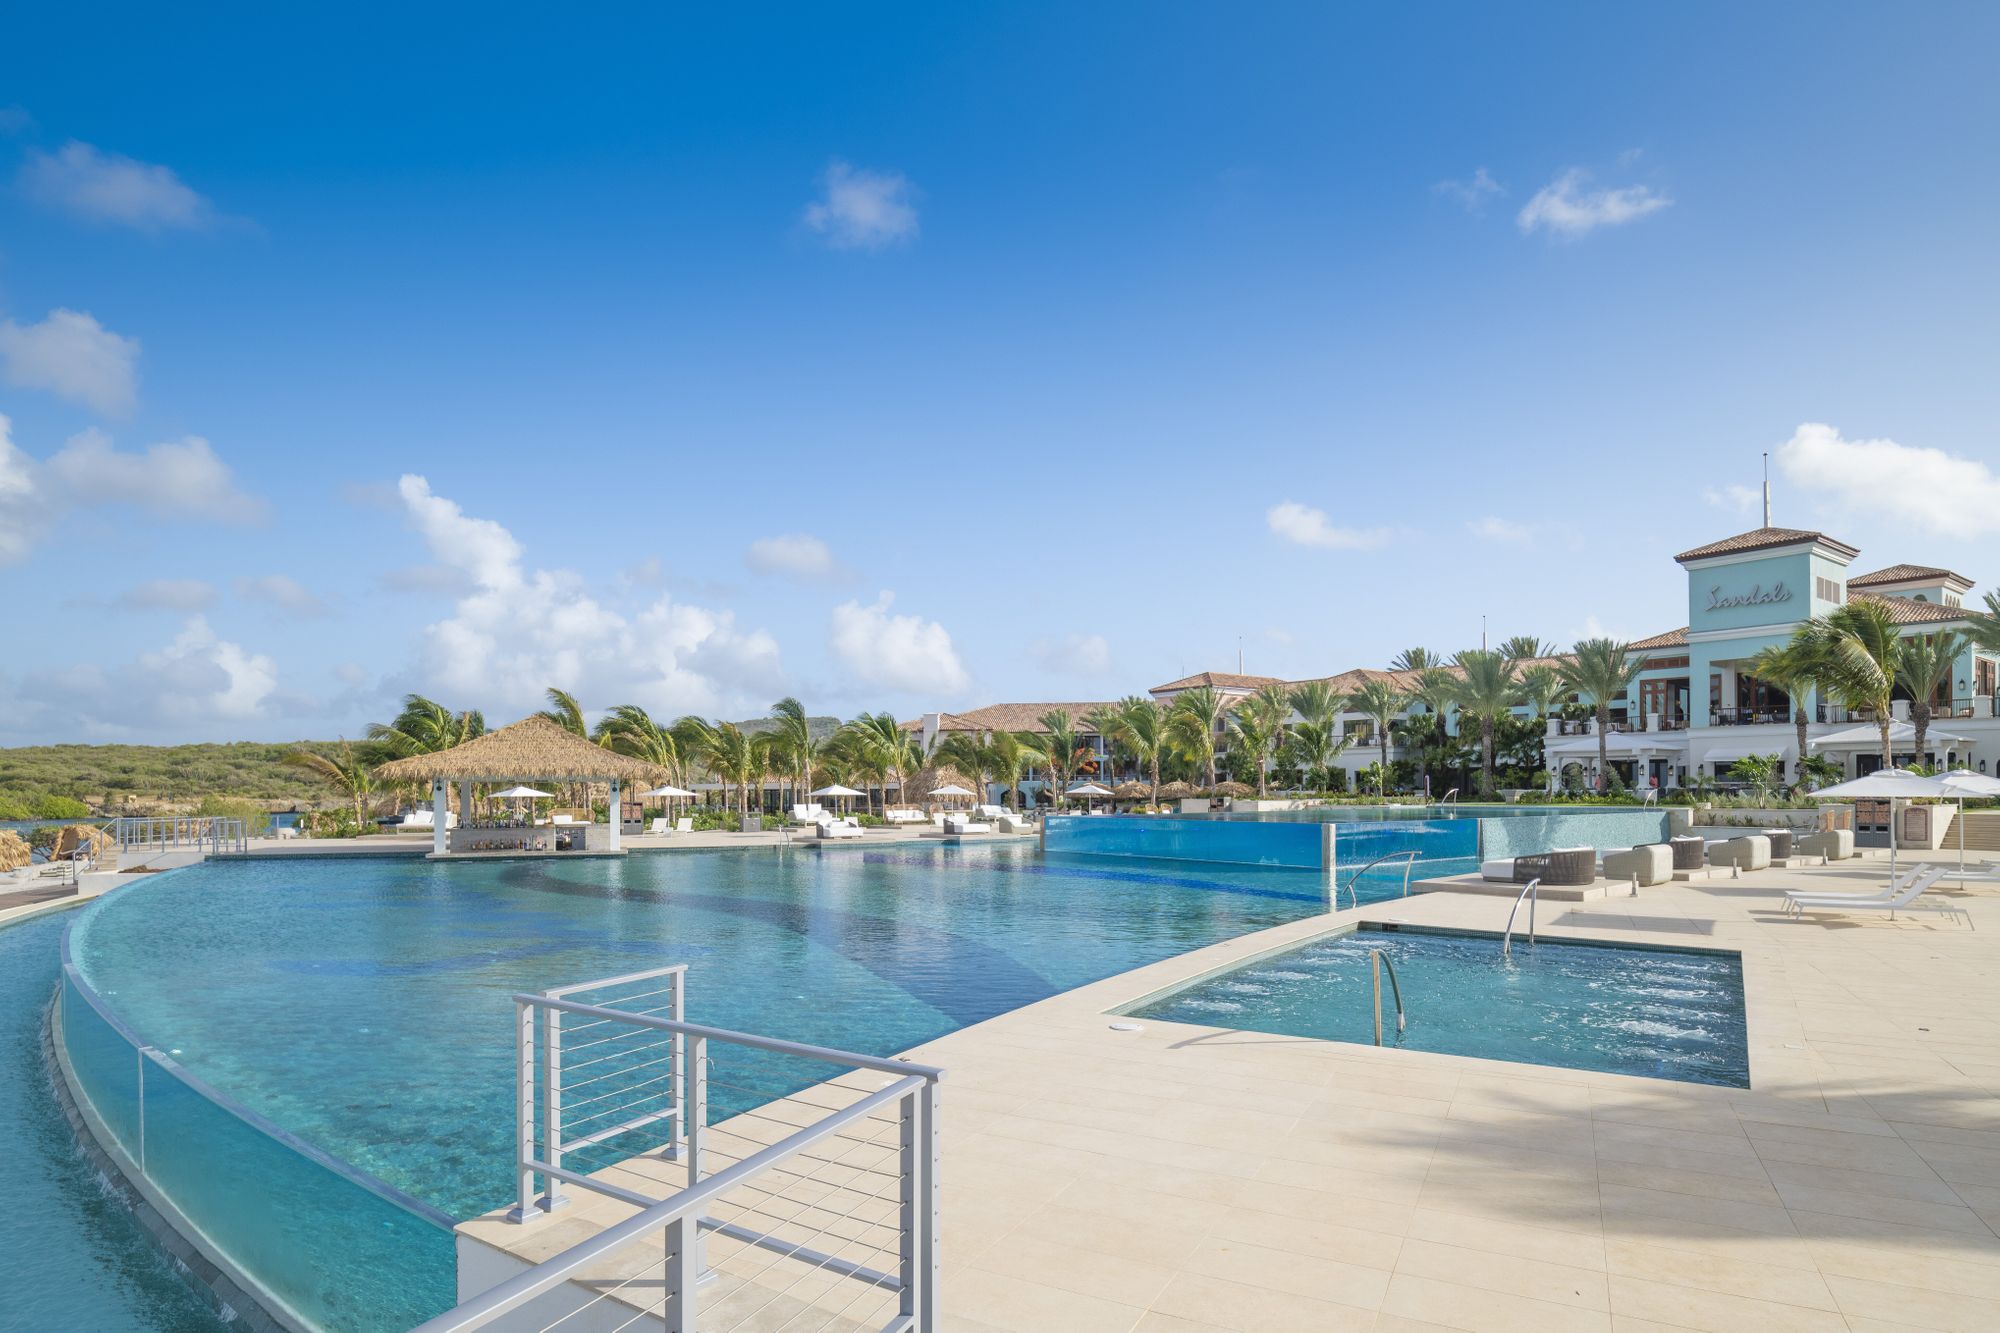 sandals-curacao-pool-2--1-